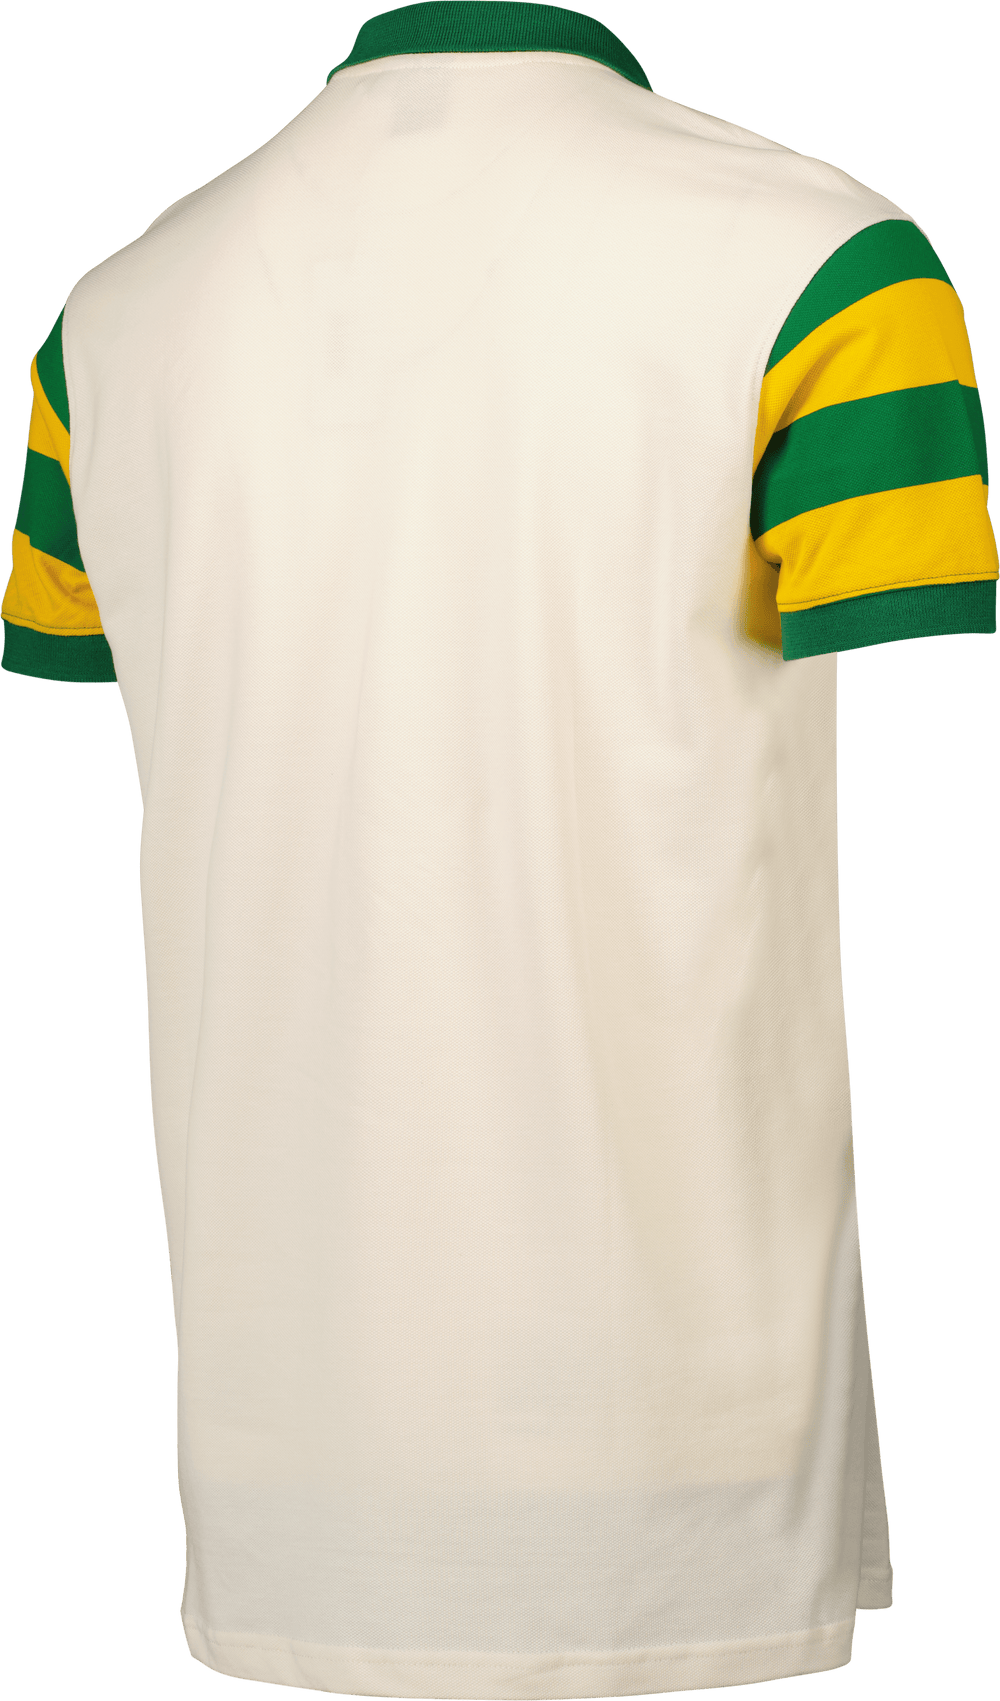 ROWDIES MEN'S WHITE CREST STRIPED SLEEVES SPORT DESIGN SWEDEN POLO - The Bay Republic | Team Store of the Tampa Bay Rays & Rowdies